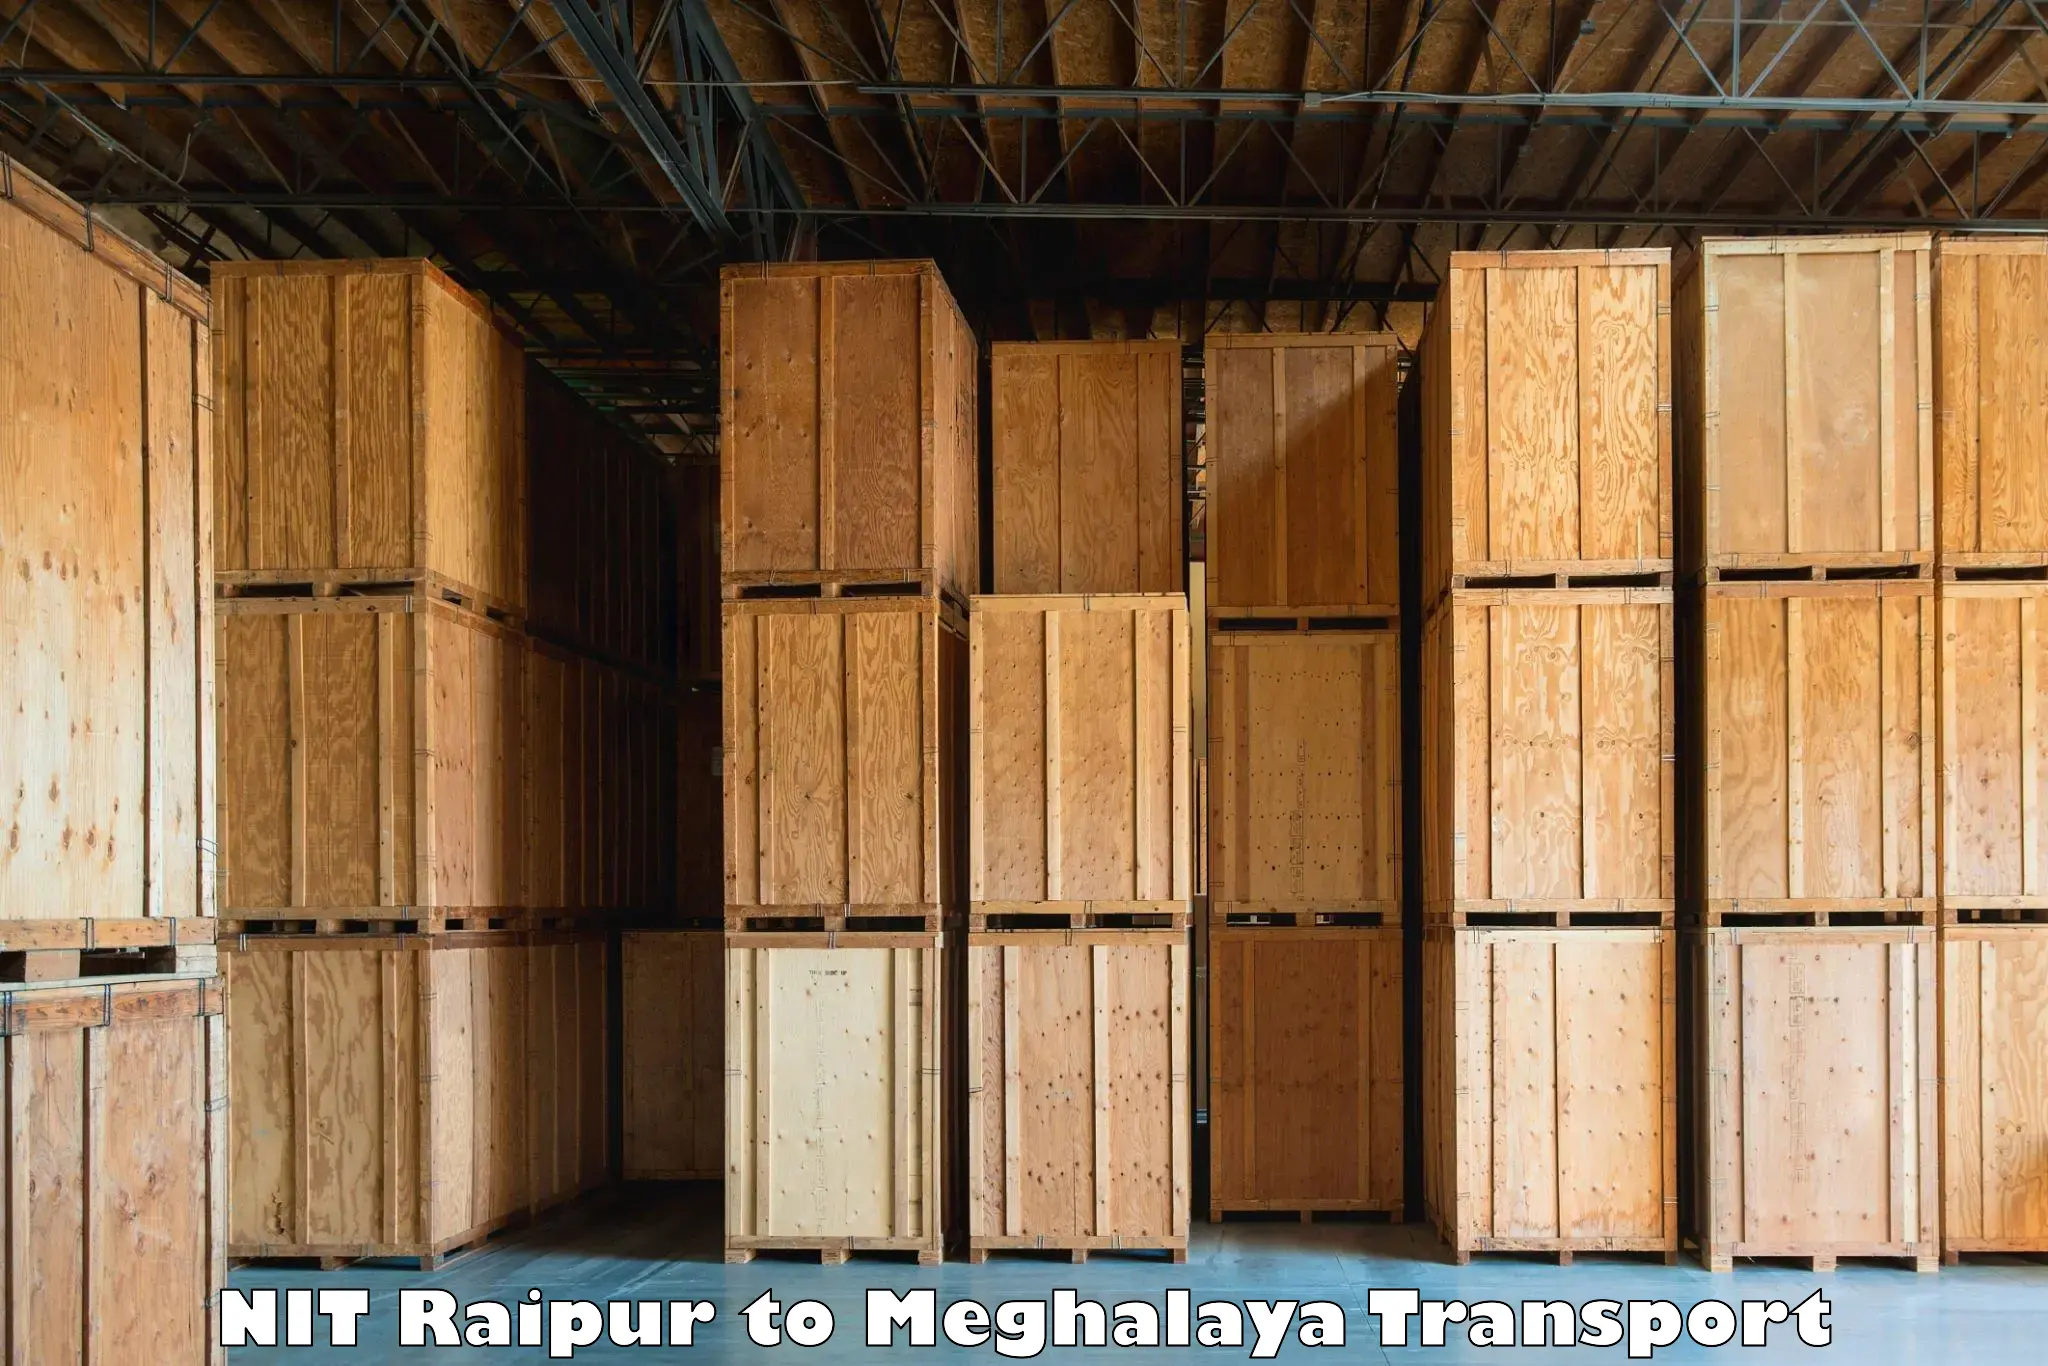 Container transport service NIT Raipur to Jowai